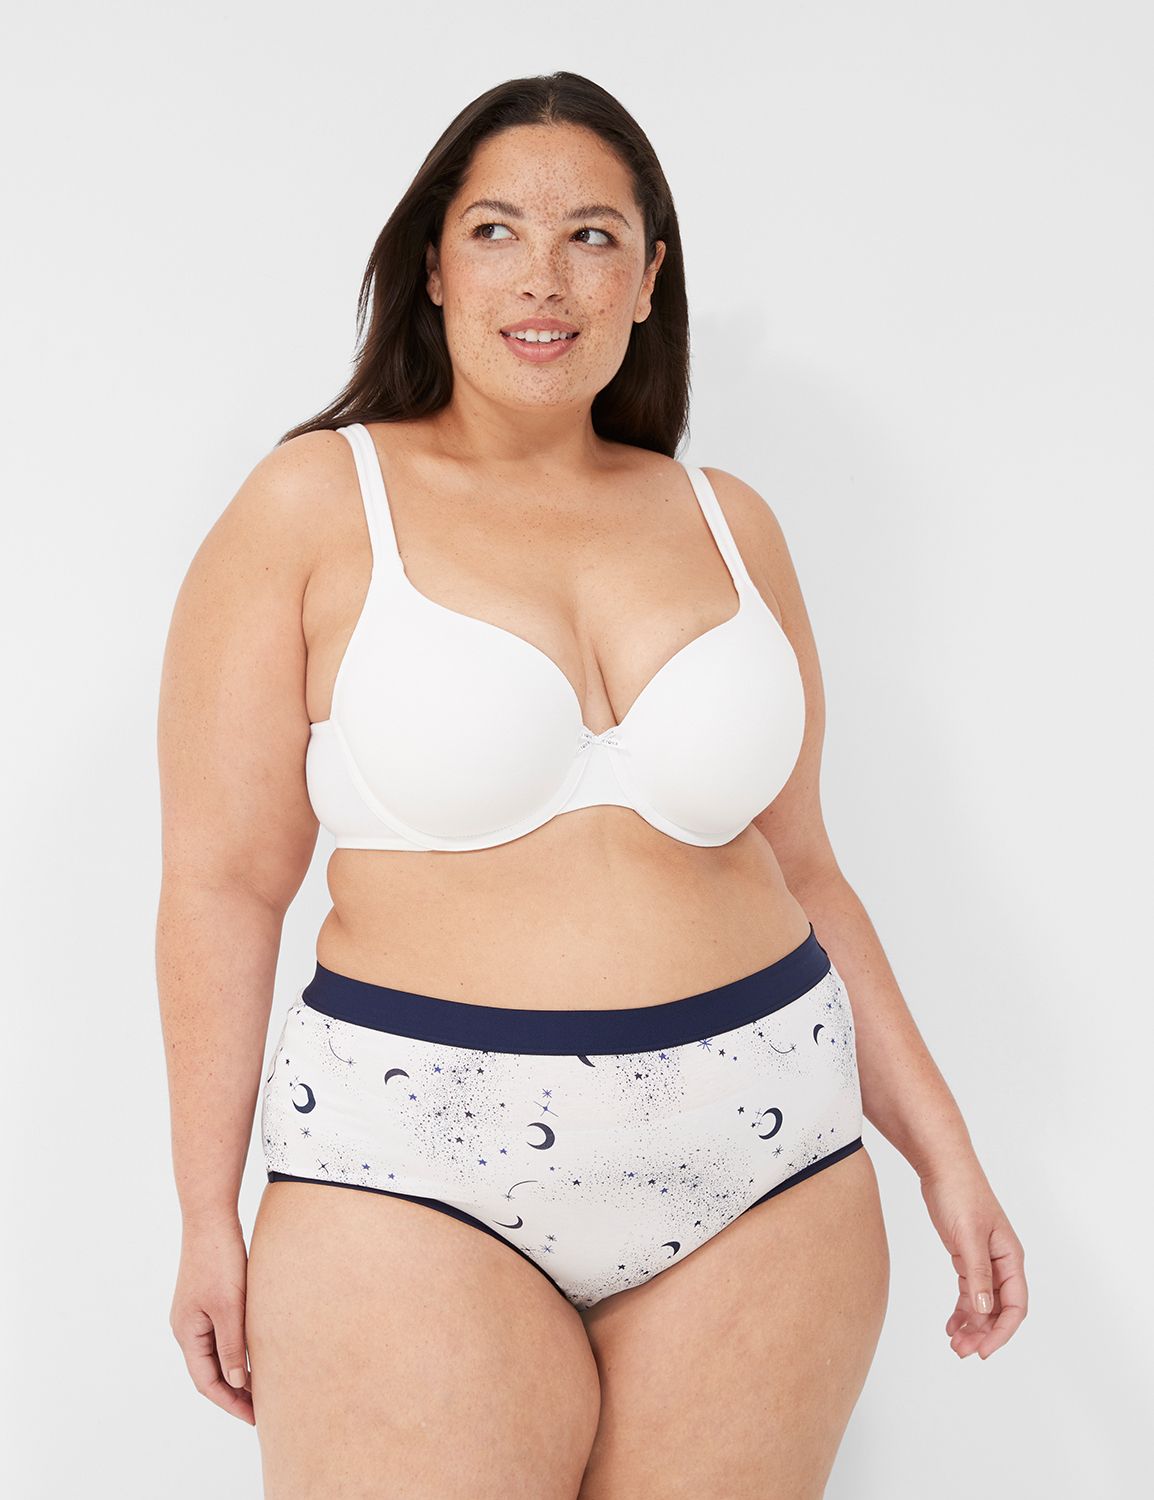 Cacique Lane Bryant $52 The Seriously Sexy Boost Plunge Front